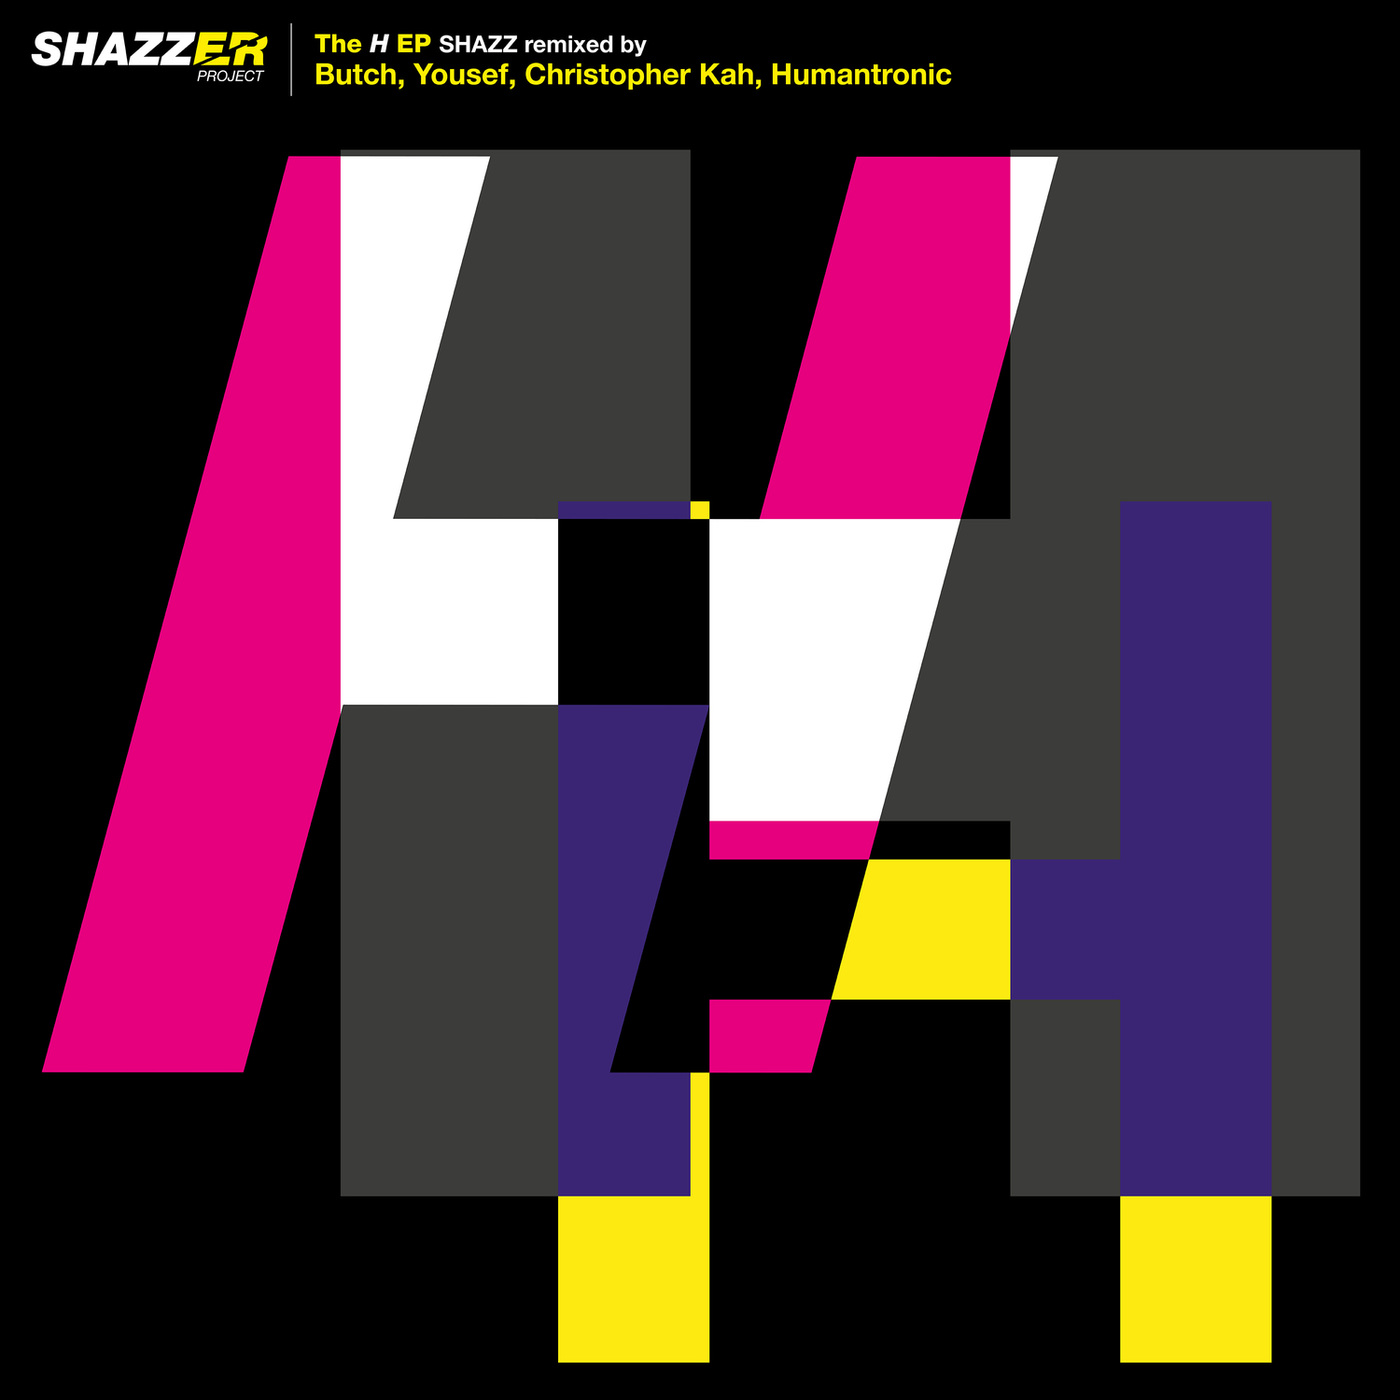 Shazz - Shazzer Project The "H" EP / Electronic Griot